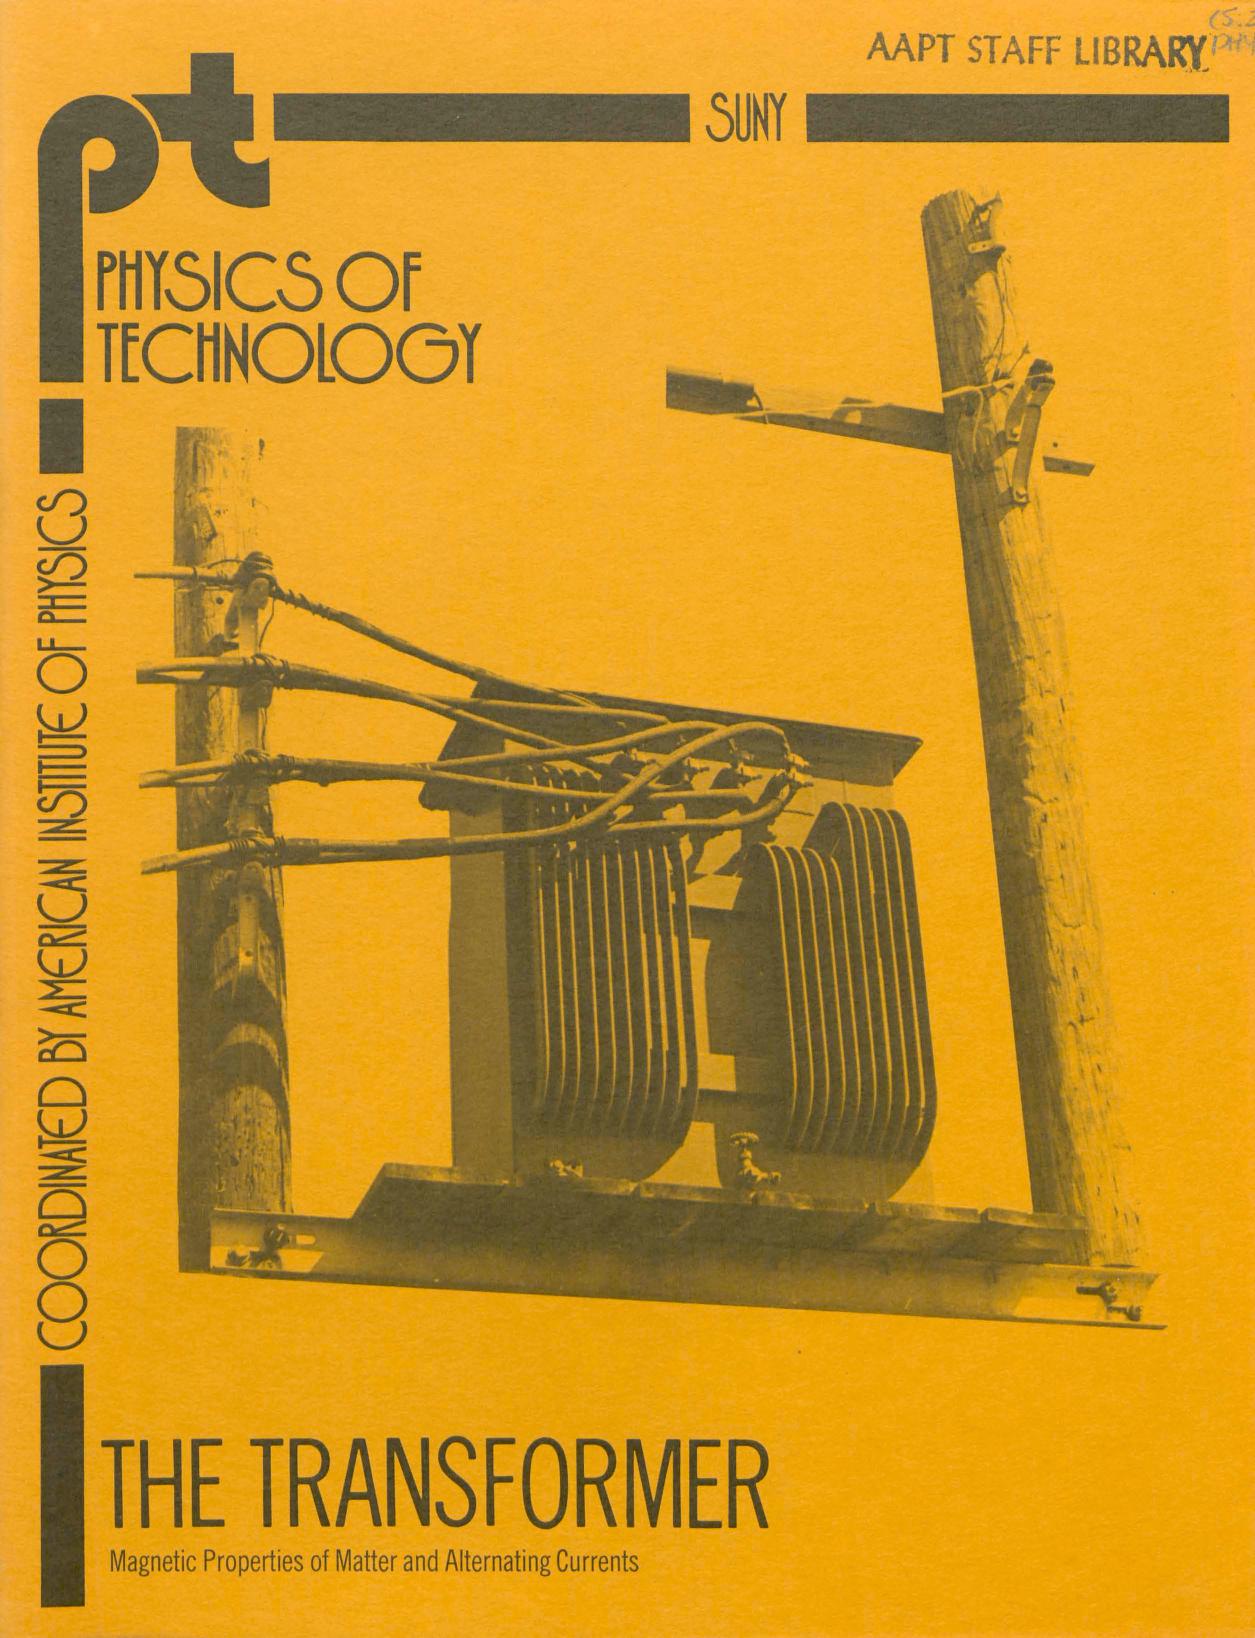 The Transformer (Physics of Technology Series) : Arnold A. Strassenburg :  Free Download, Borrow, and Streaming : Internet Archive